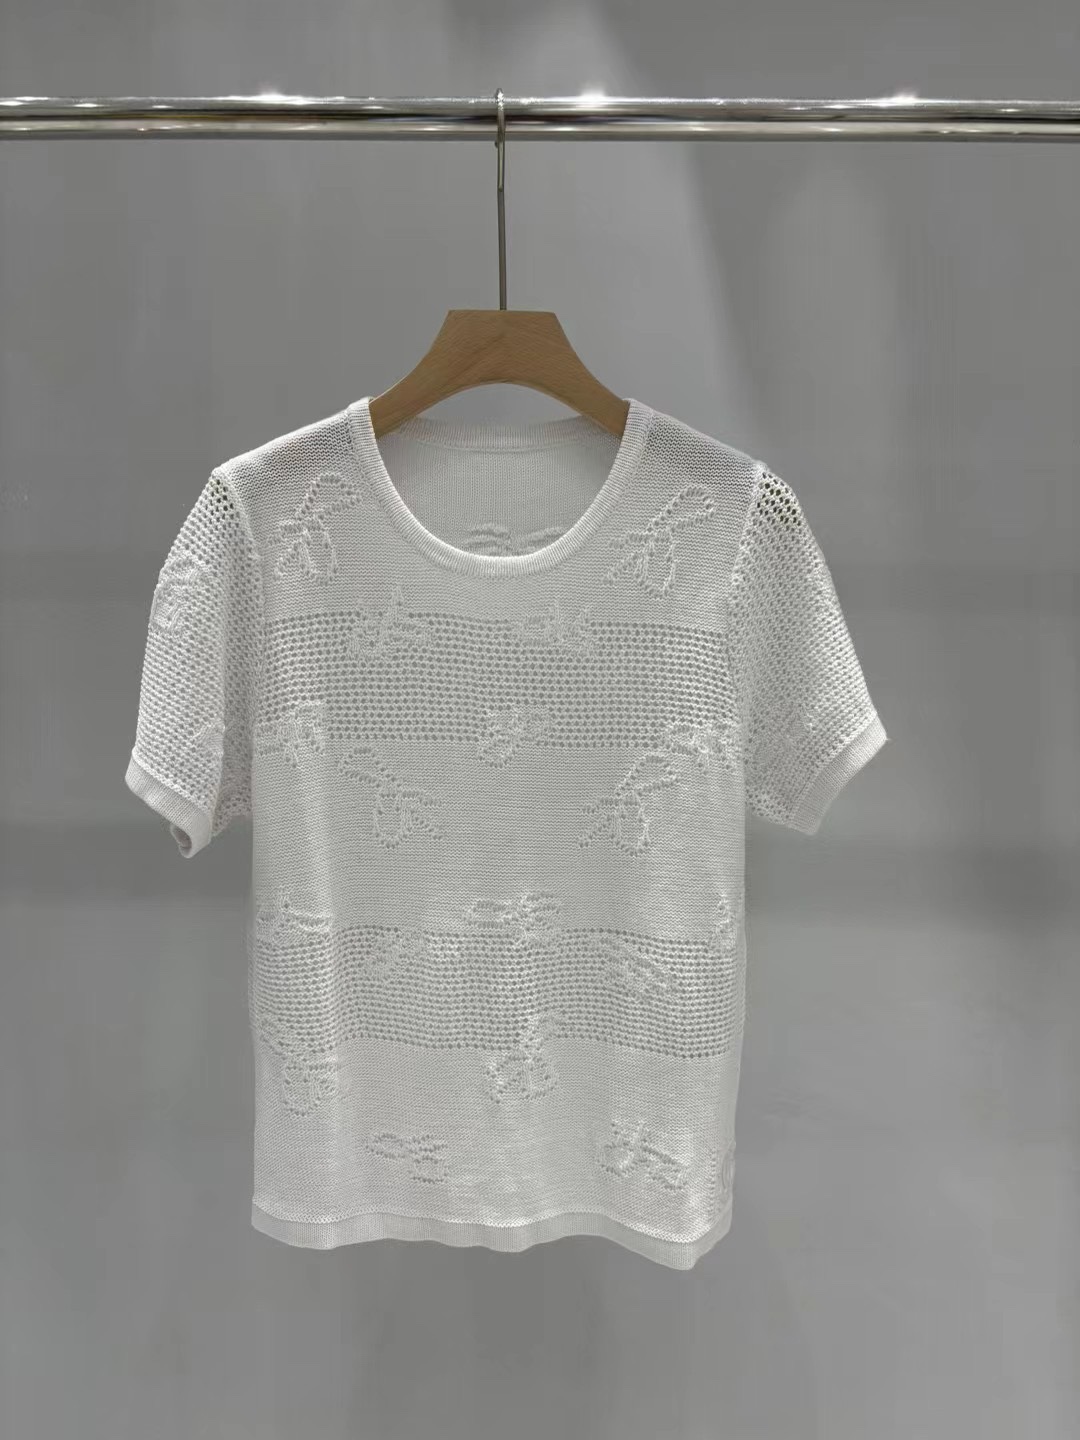 Chanel Clothing Shirts & Blouses cheap online Best Designer
 Openwork Knitting Summer Collection